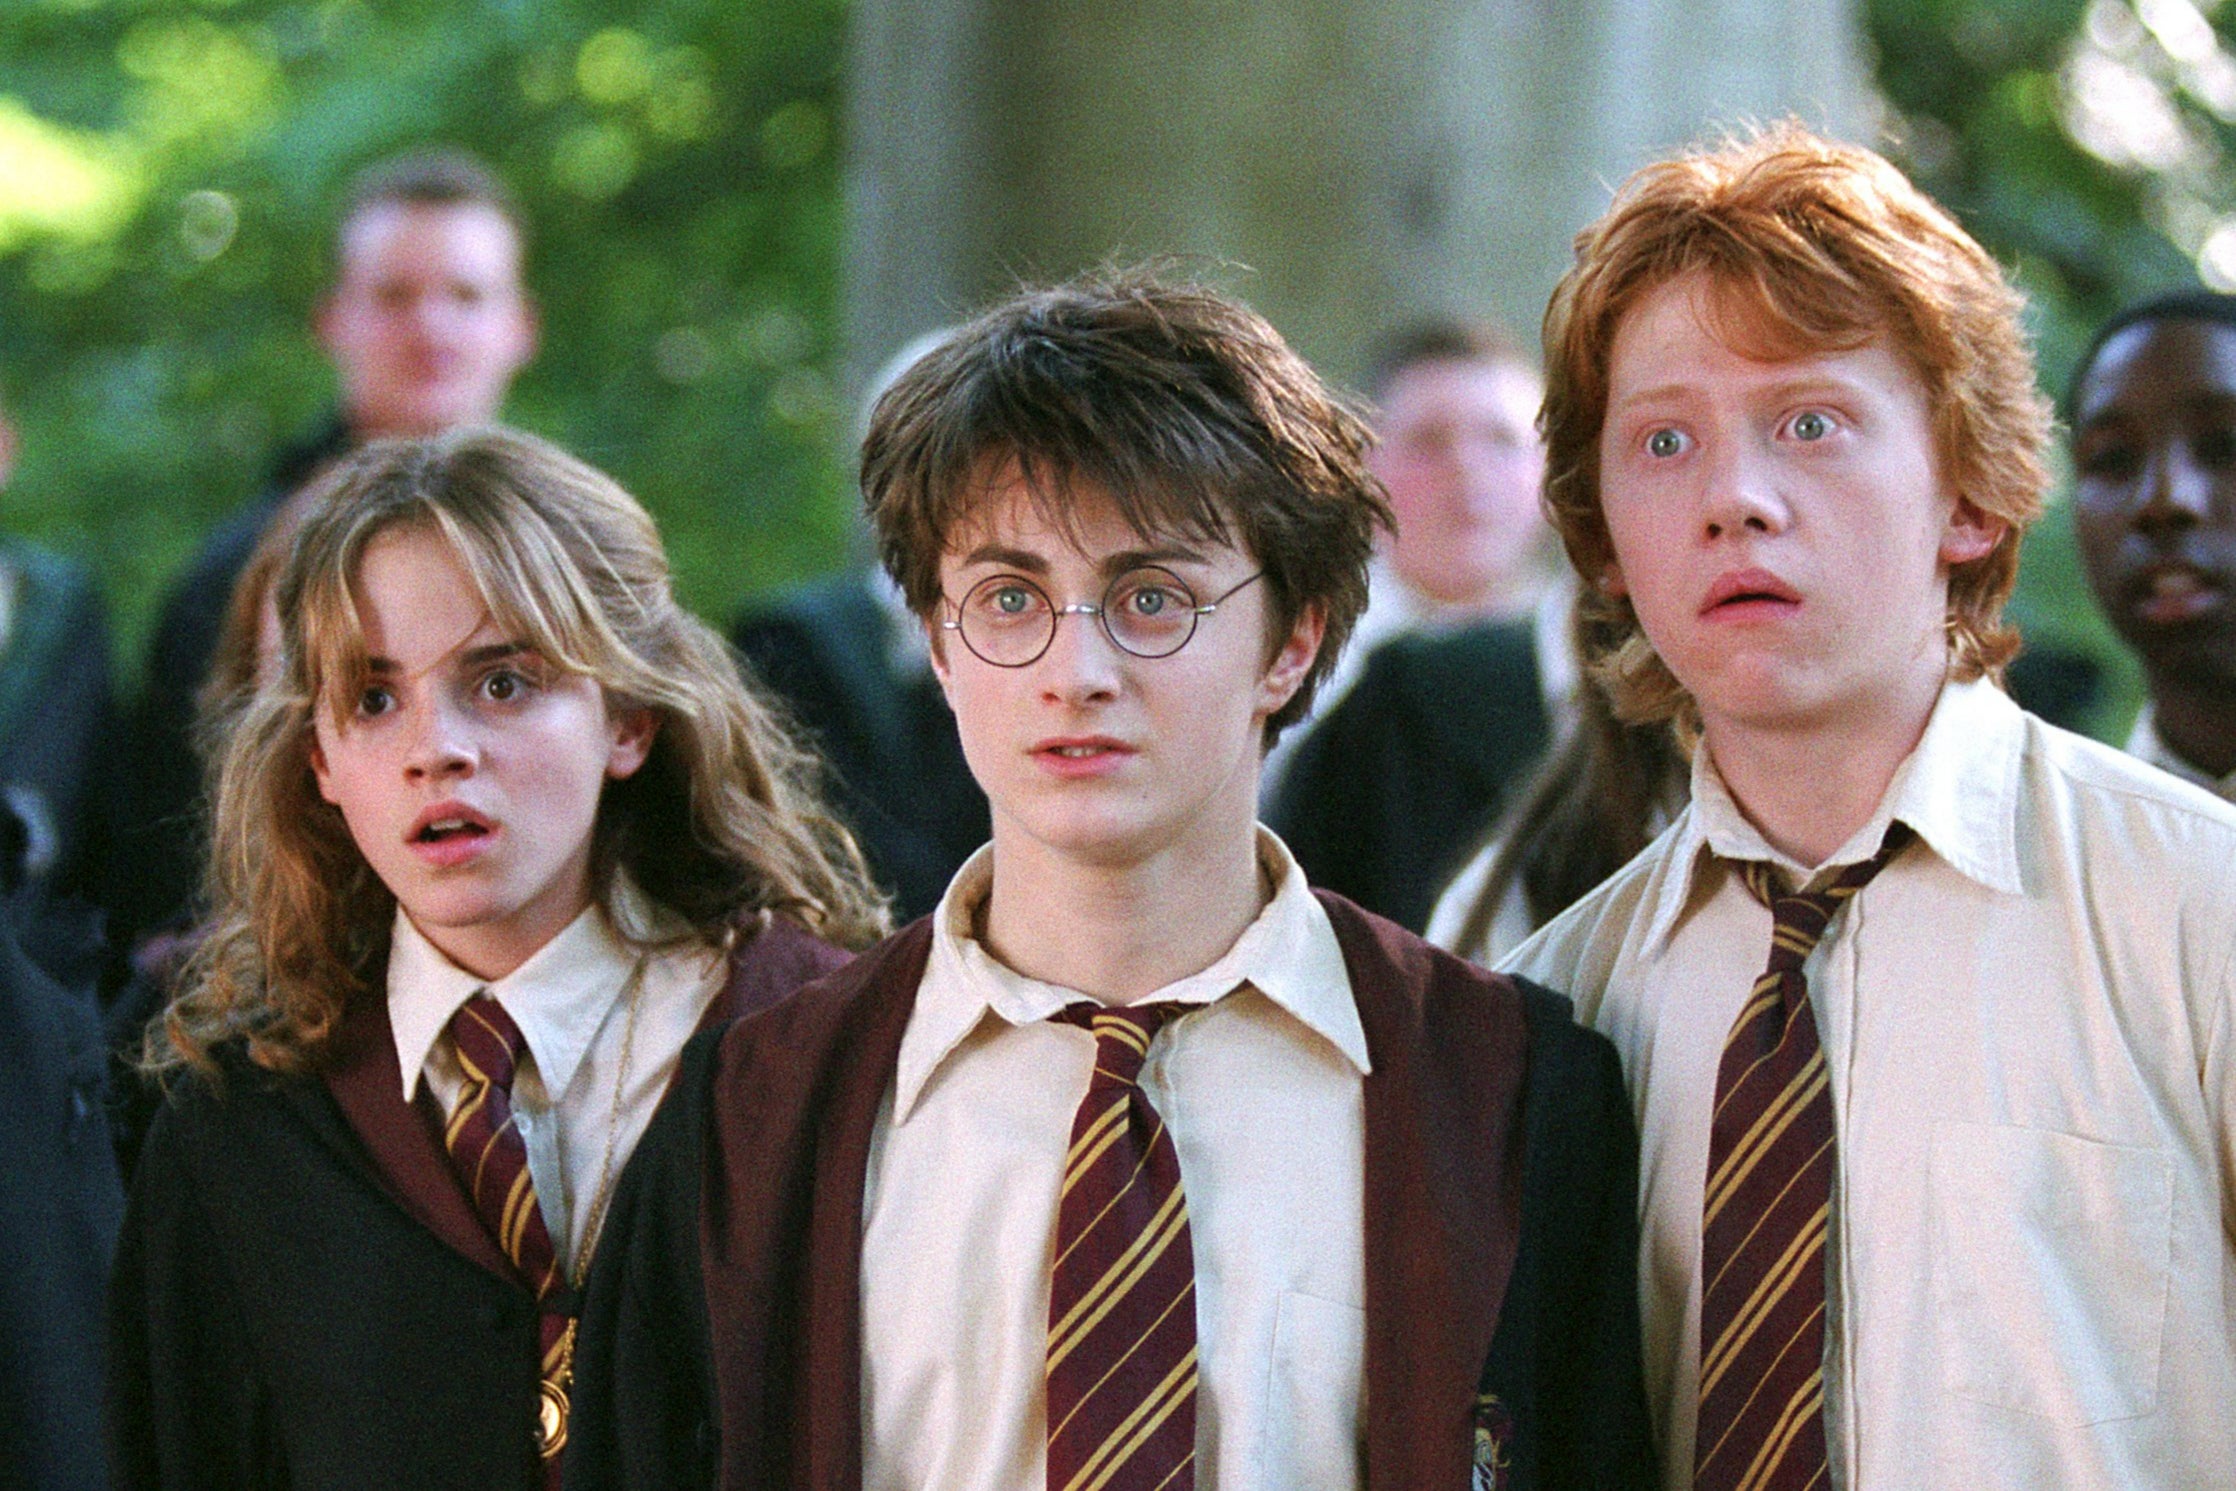 Emma Watson, Daniel Radcliffe and Rupert Grint in ‘Harry Potter and the Philosopher’s Stone'